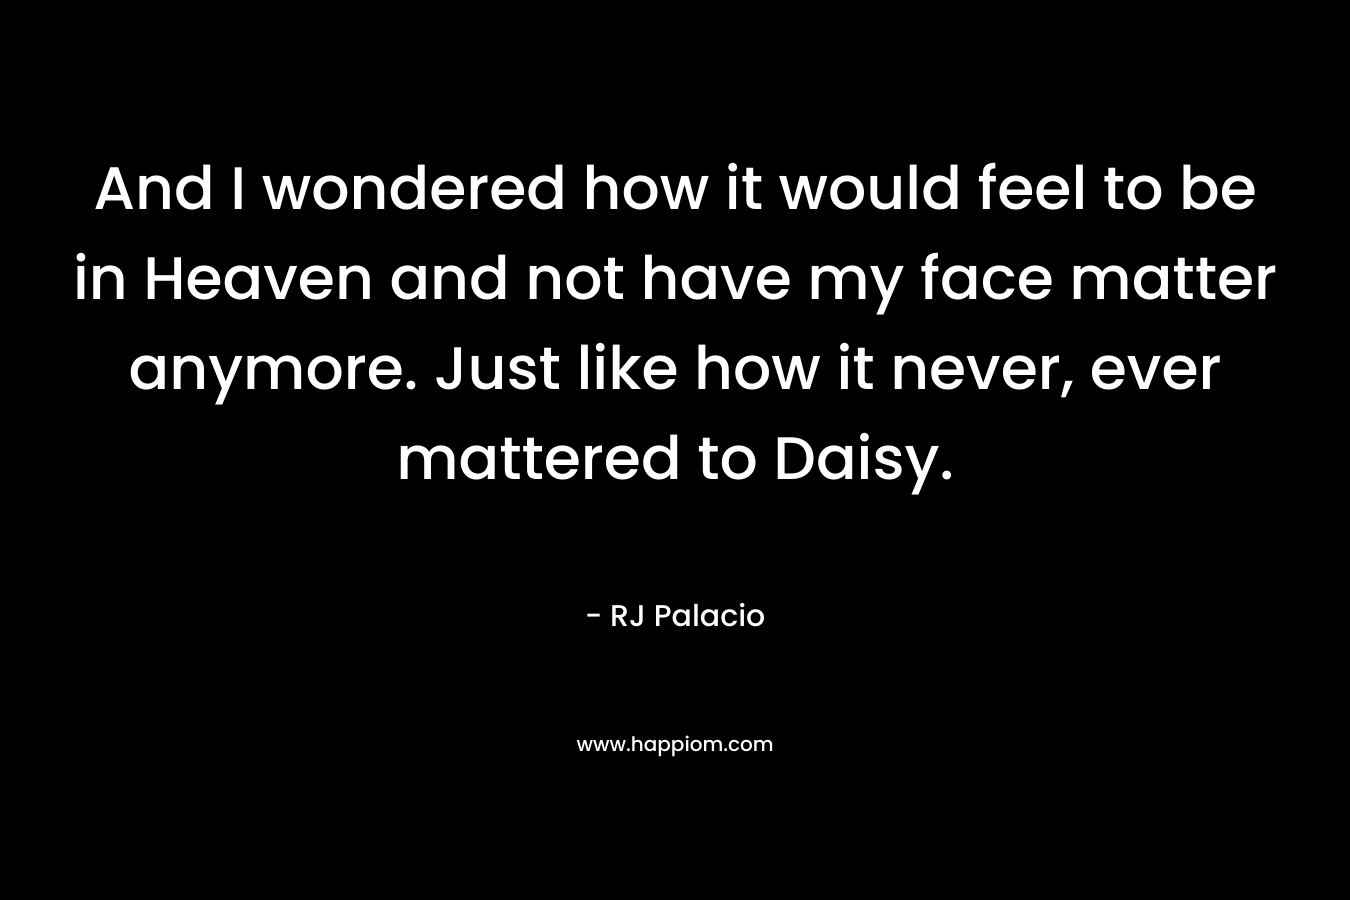 And I wondered how it would feel to be in Heaven and not have my face matter anymore. Just like how it never, ever mattered to Daisy. – RJ Palacio